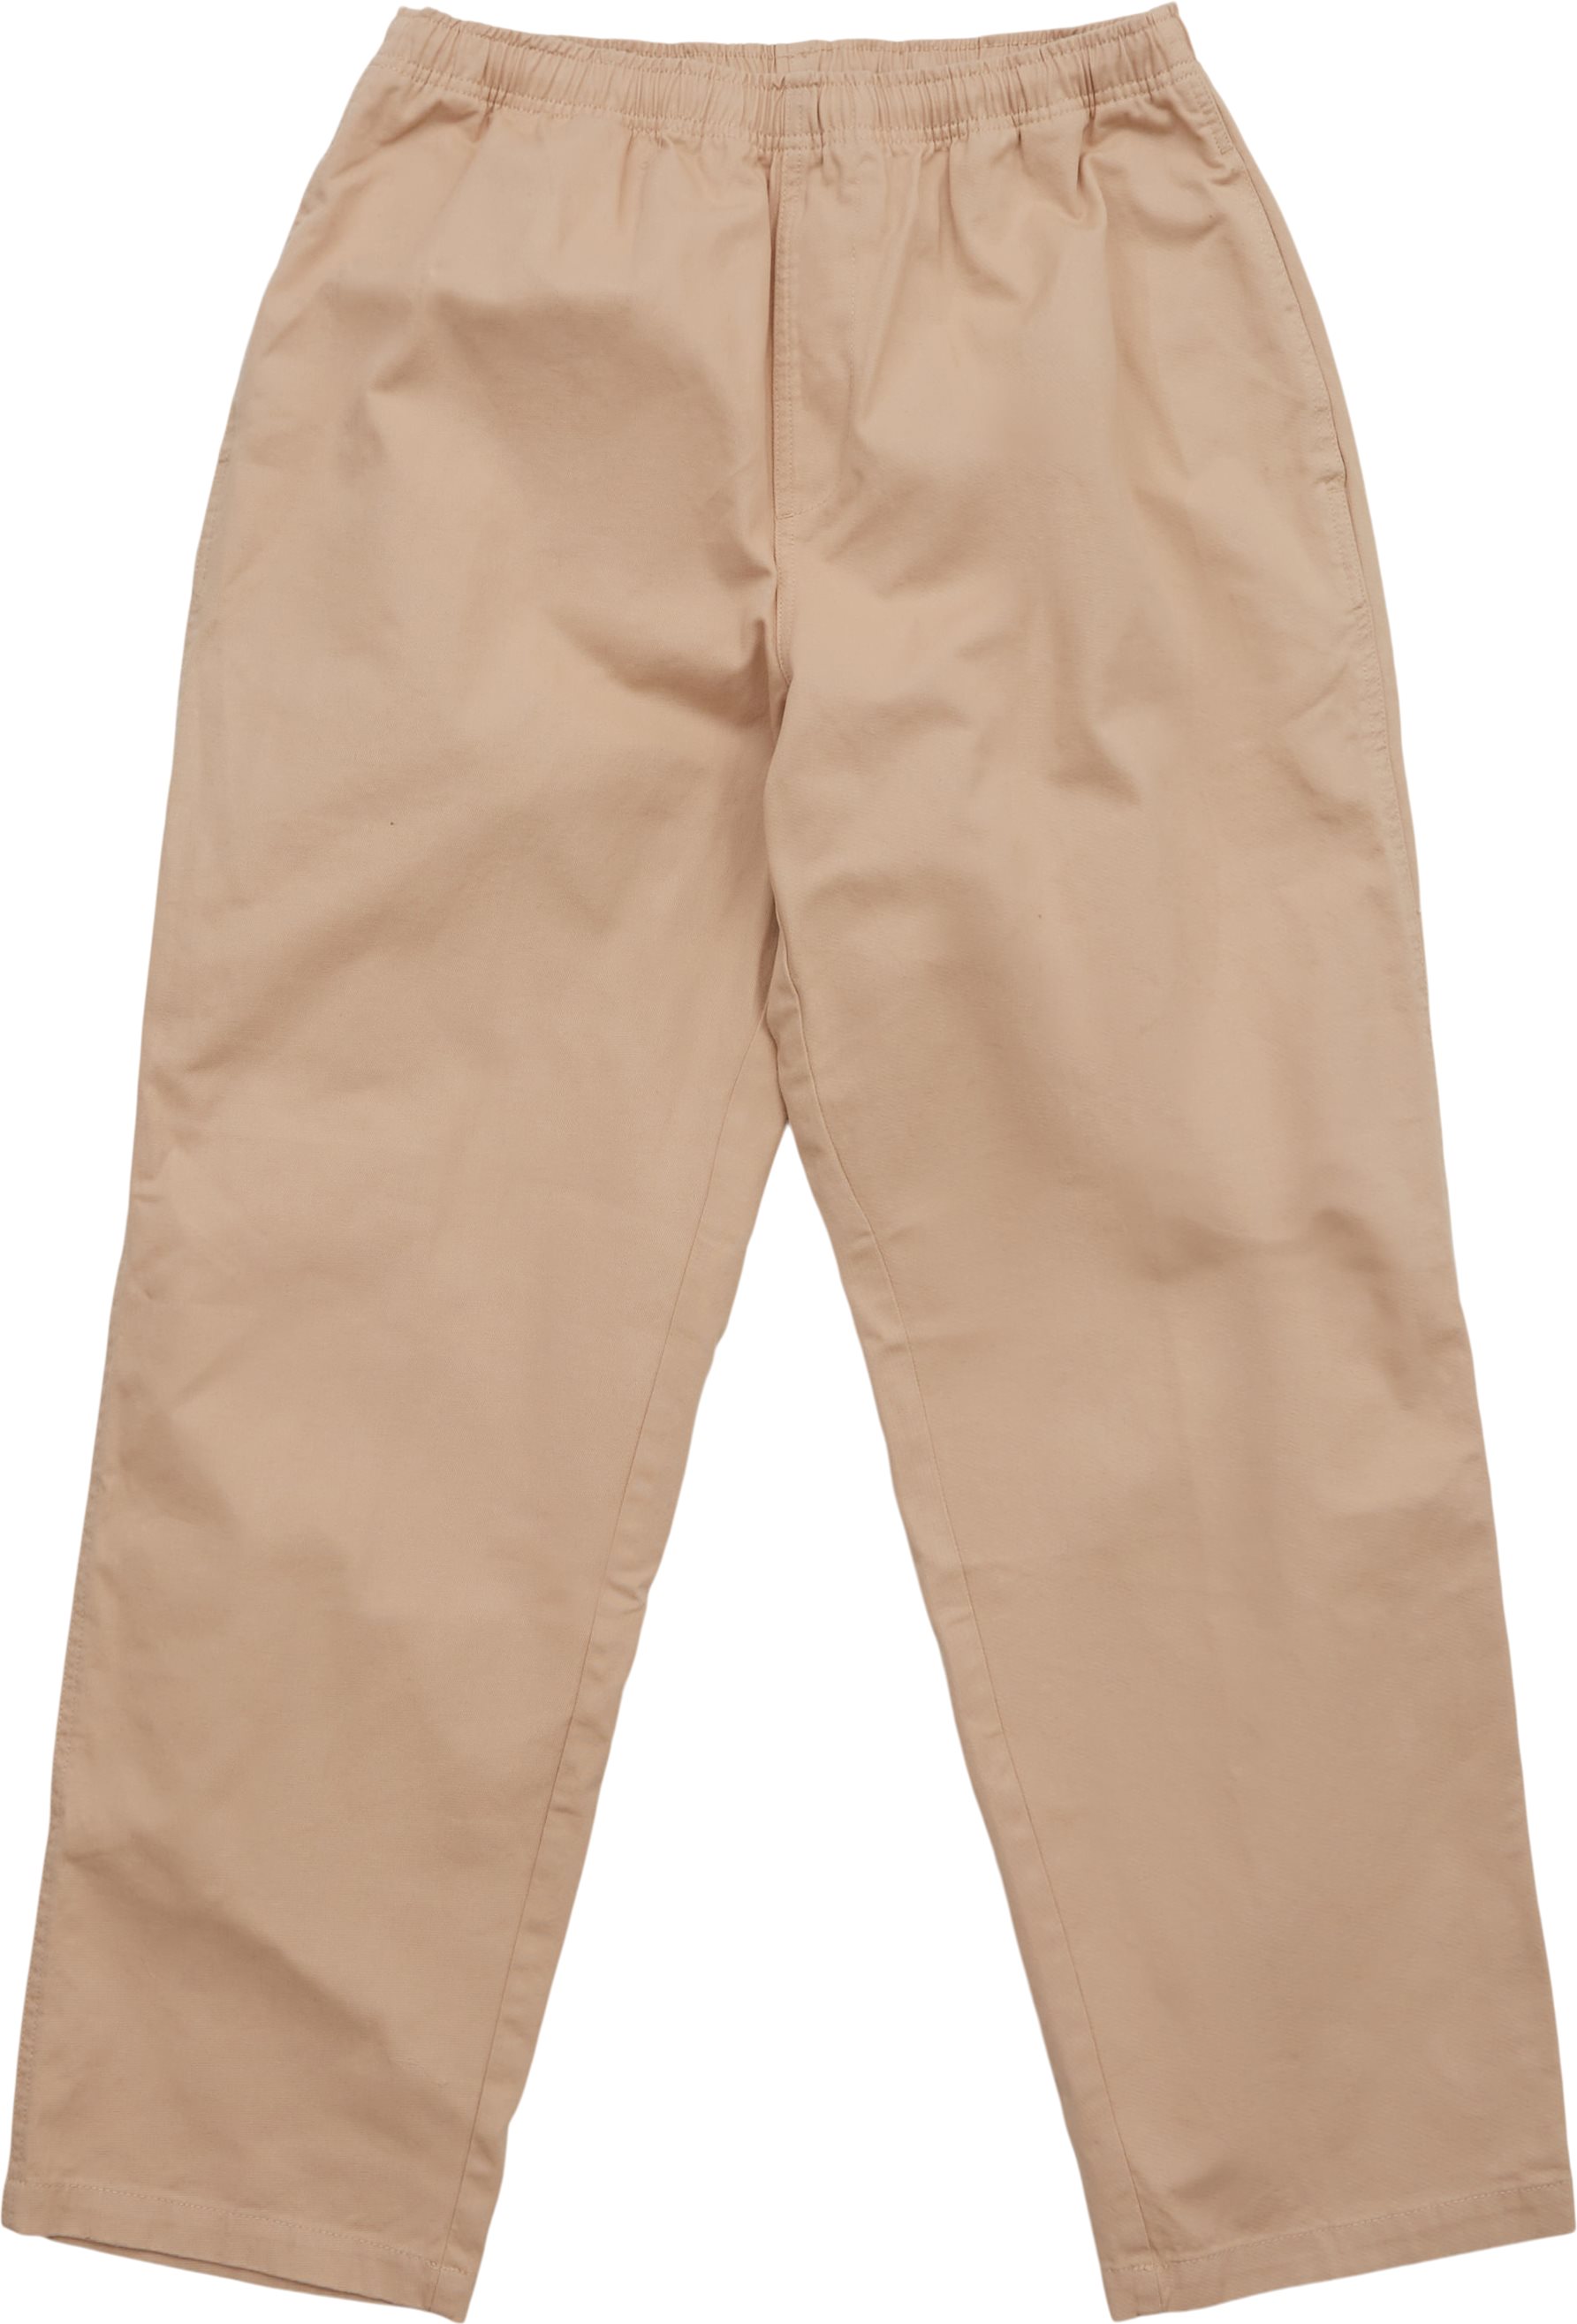 Obey Byxor EASY TWILL PANT SS23 142020142 Sand